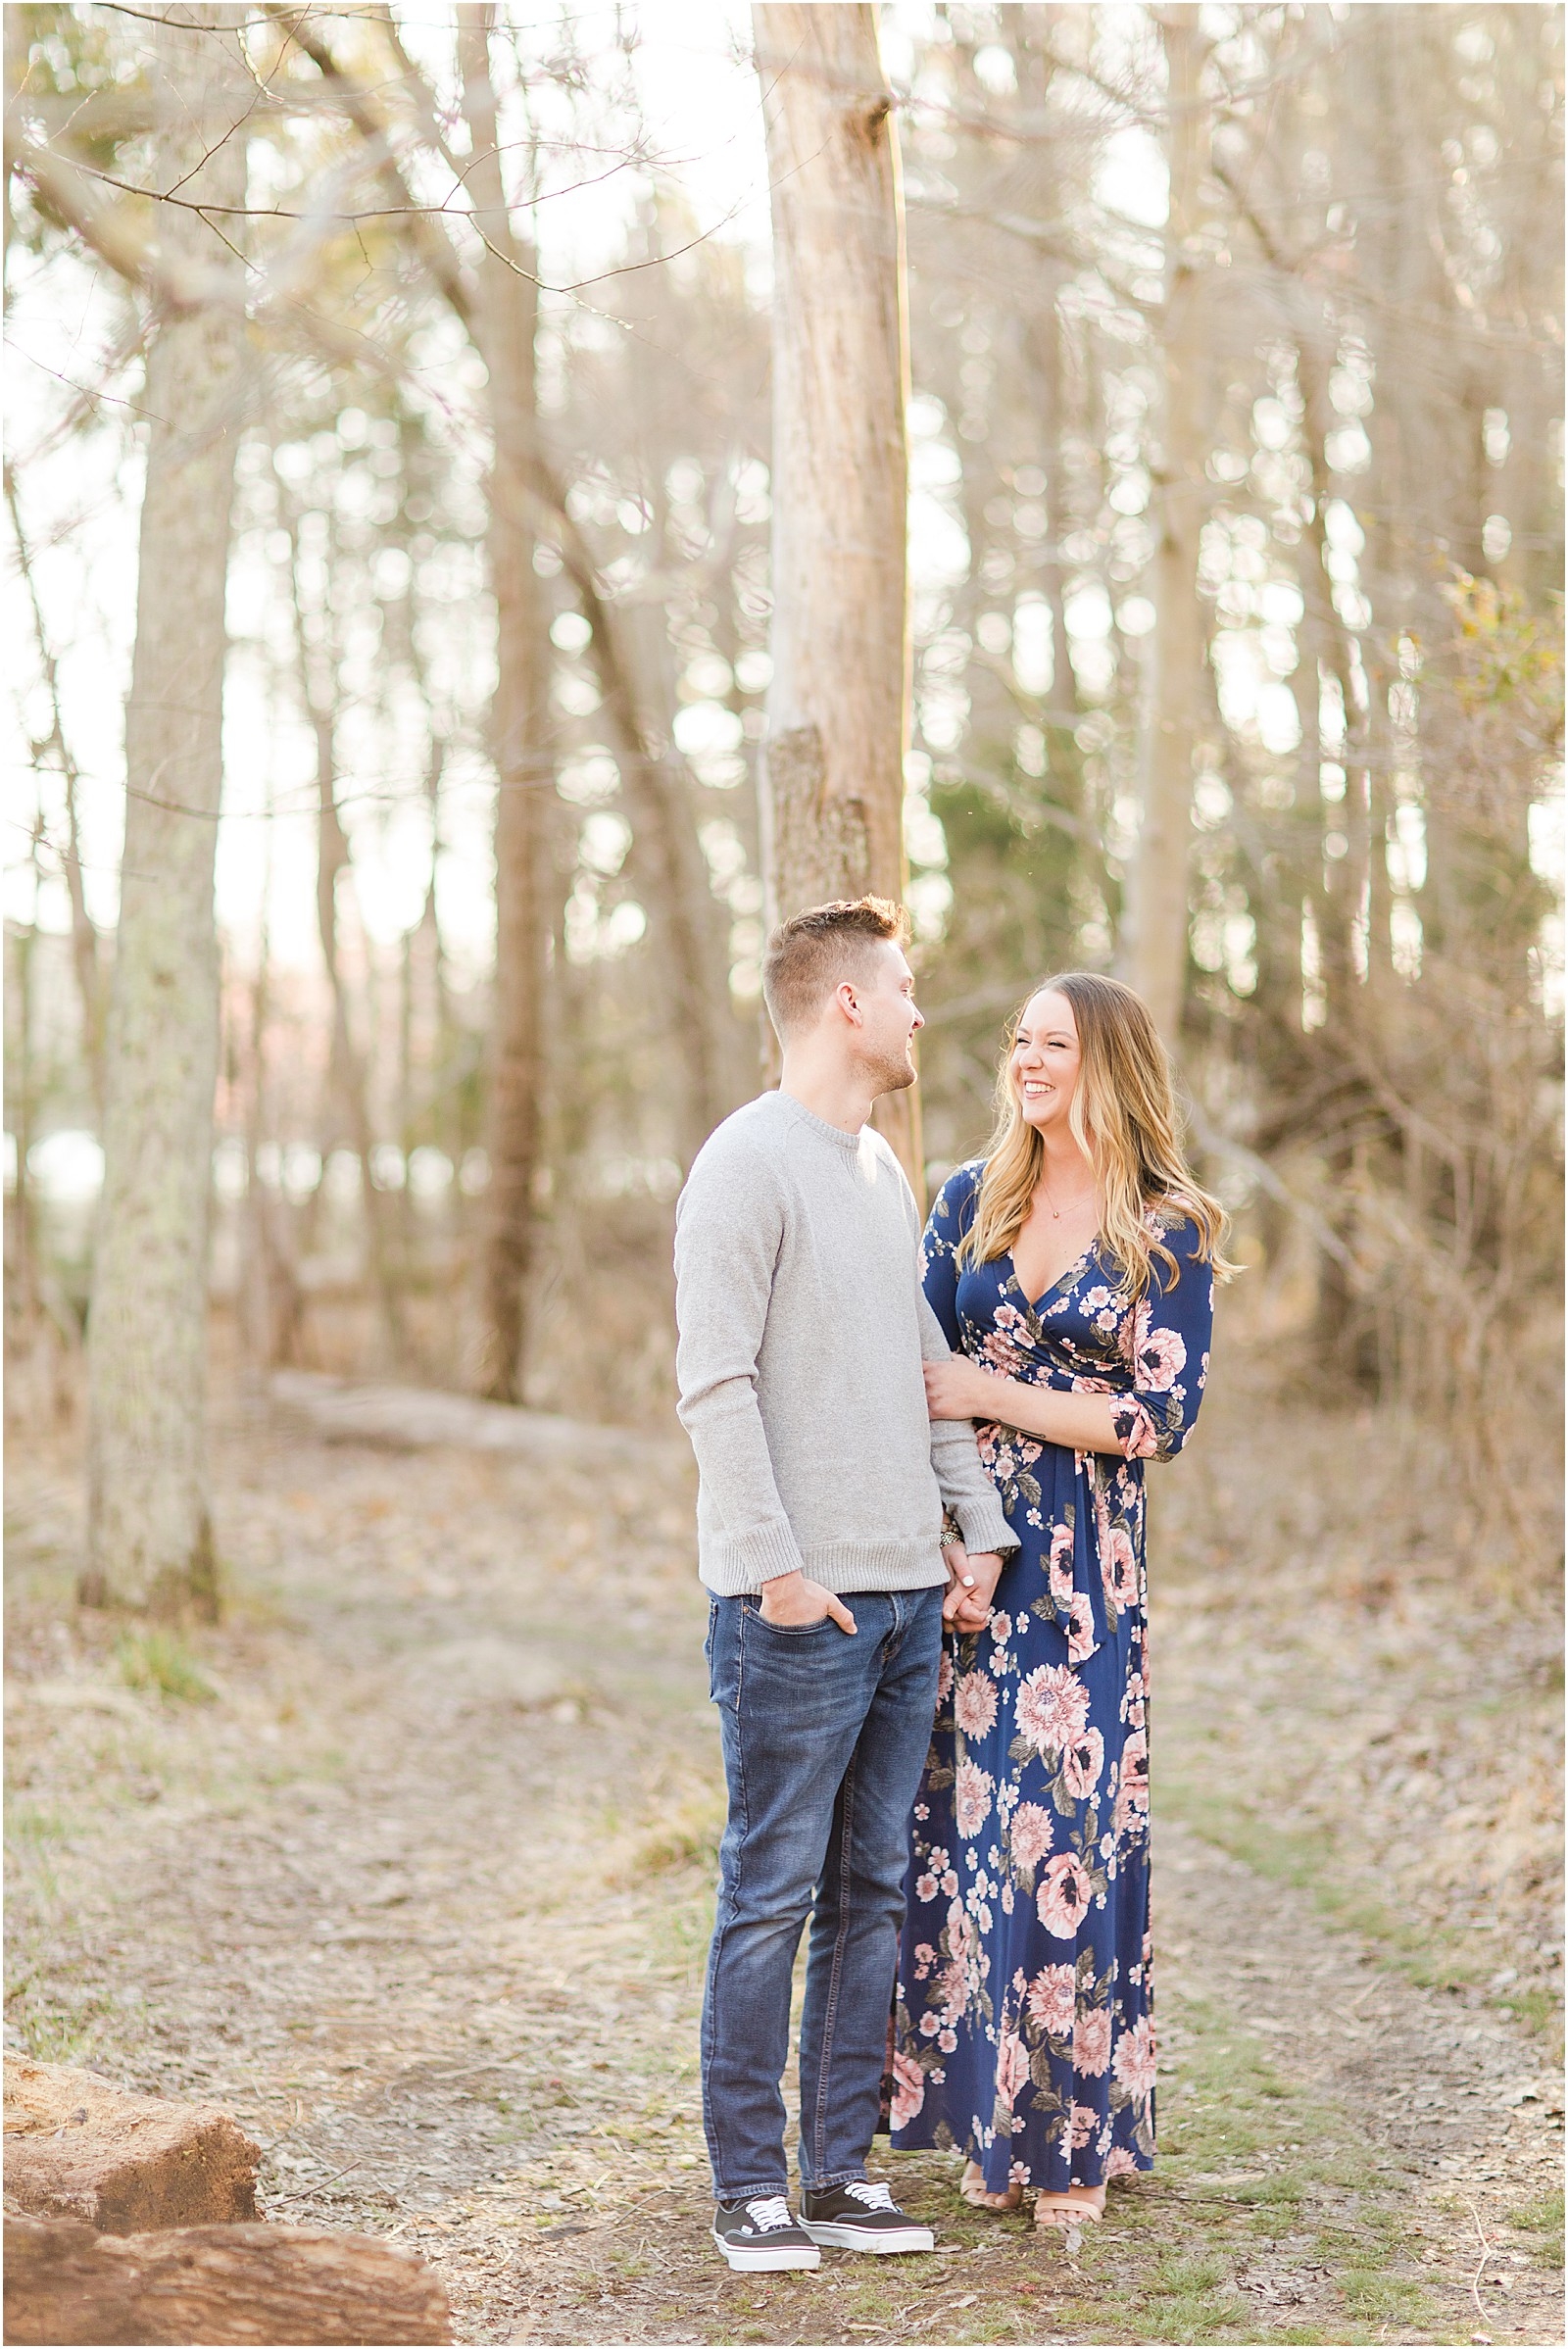 Rachel and Nick | Lincoln State Park Engagement Session 010.jpg